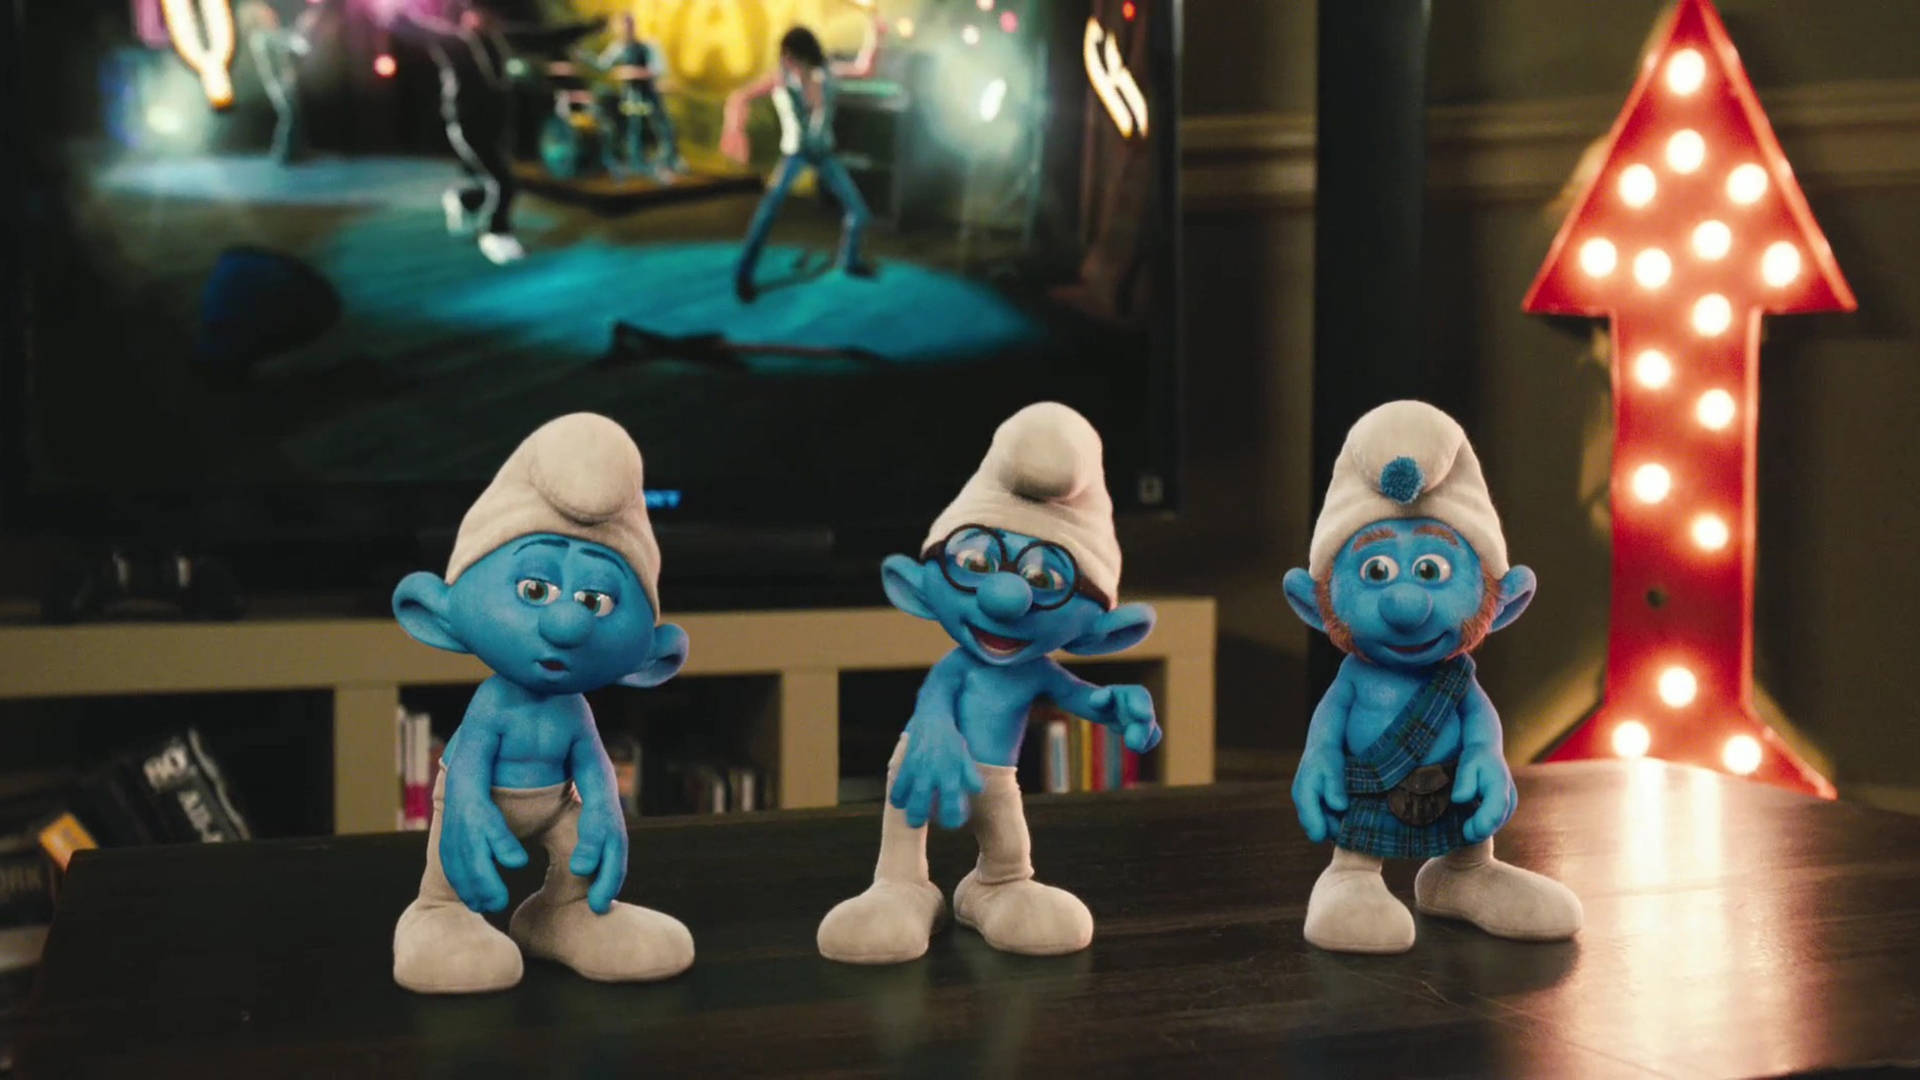 The Smurfs Live Action Background